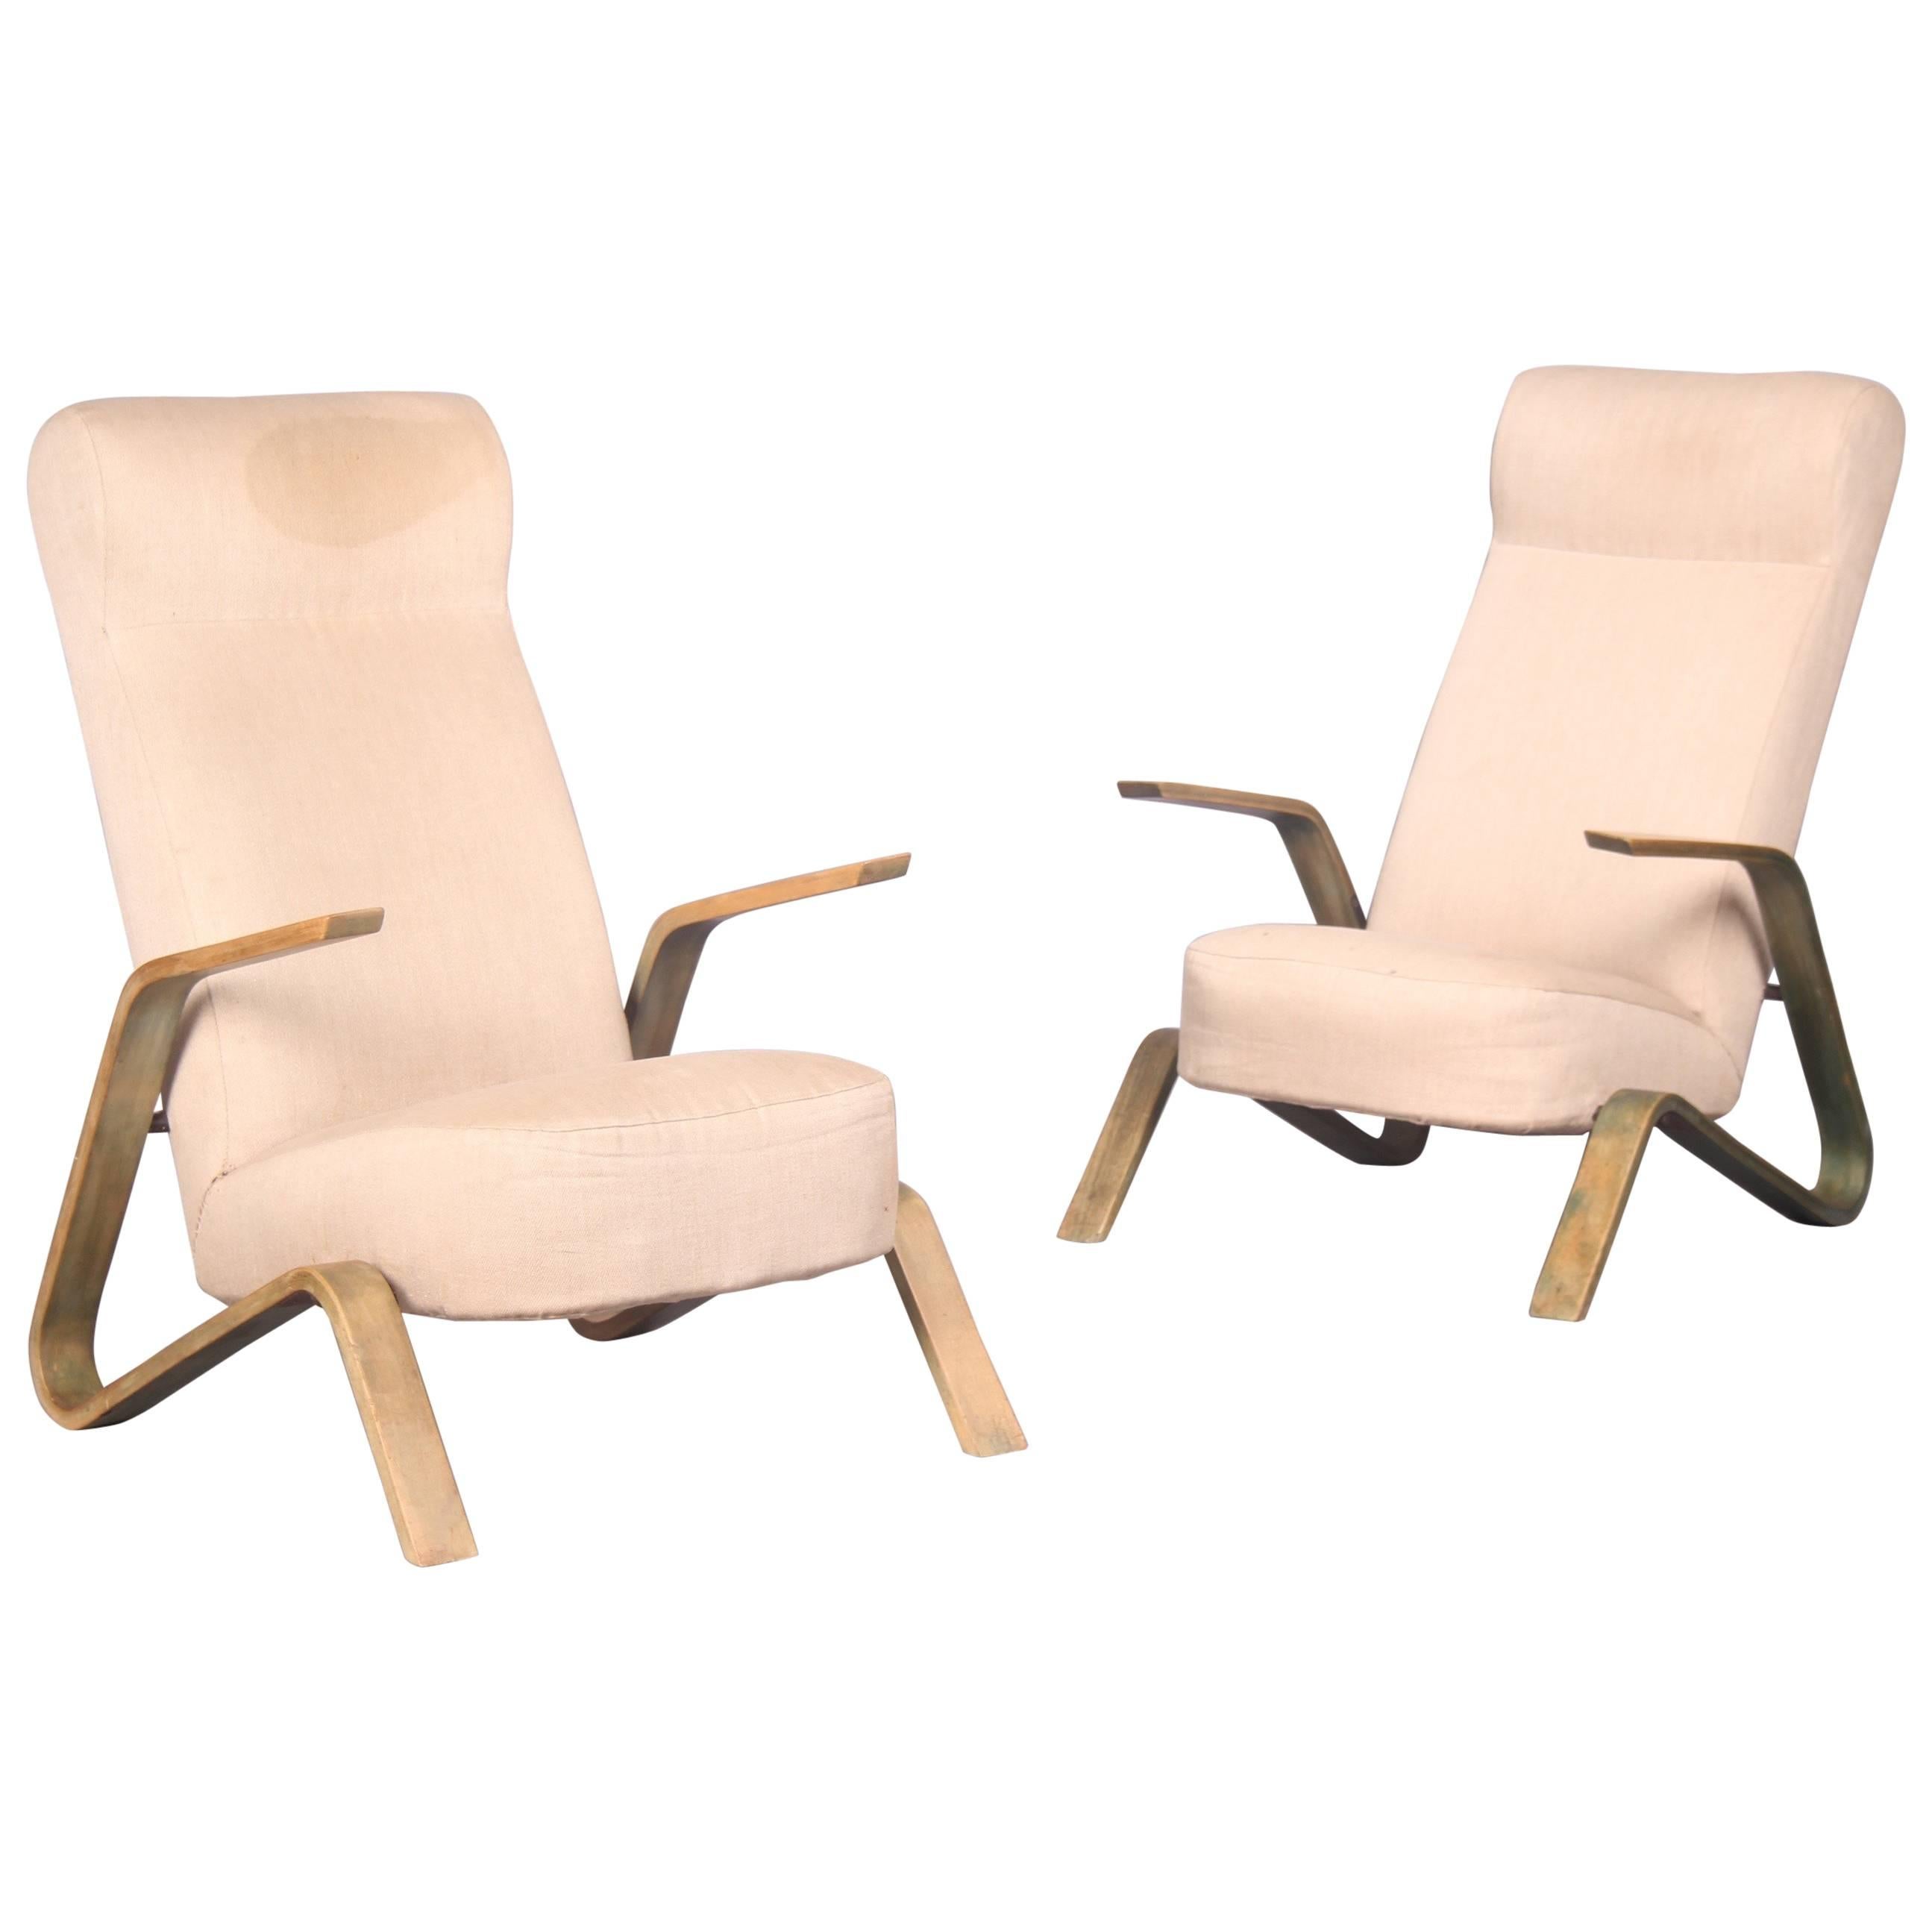 Pair of Grasshopper Chairs for the Zurich Airport